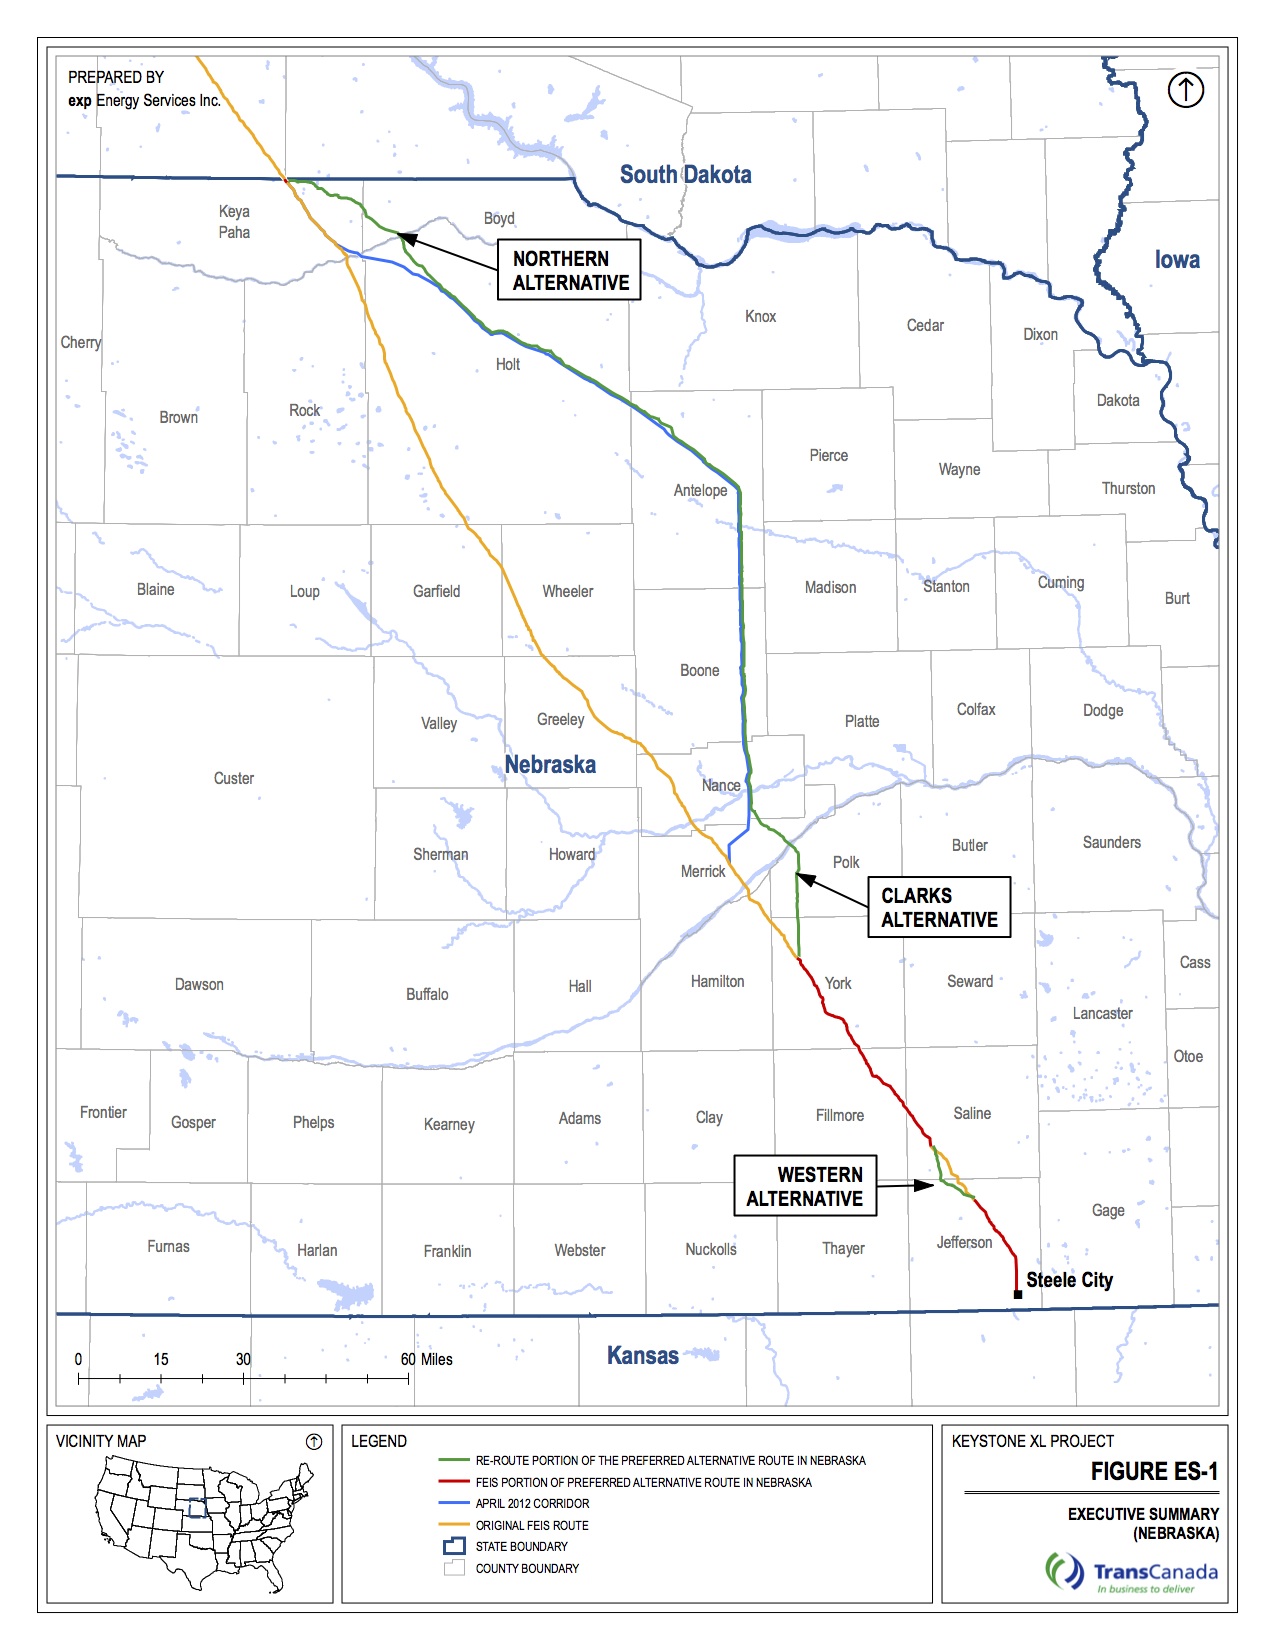 Route_Comparison_Map_from_Keystone_XL_Supplemental_Environmental_Report_to_NDEQ_-_Figure_ES-1_-_9-5-2012